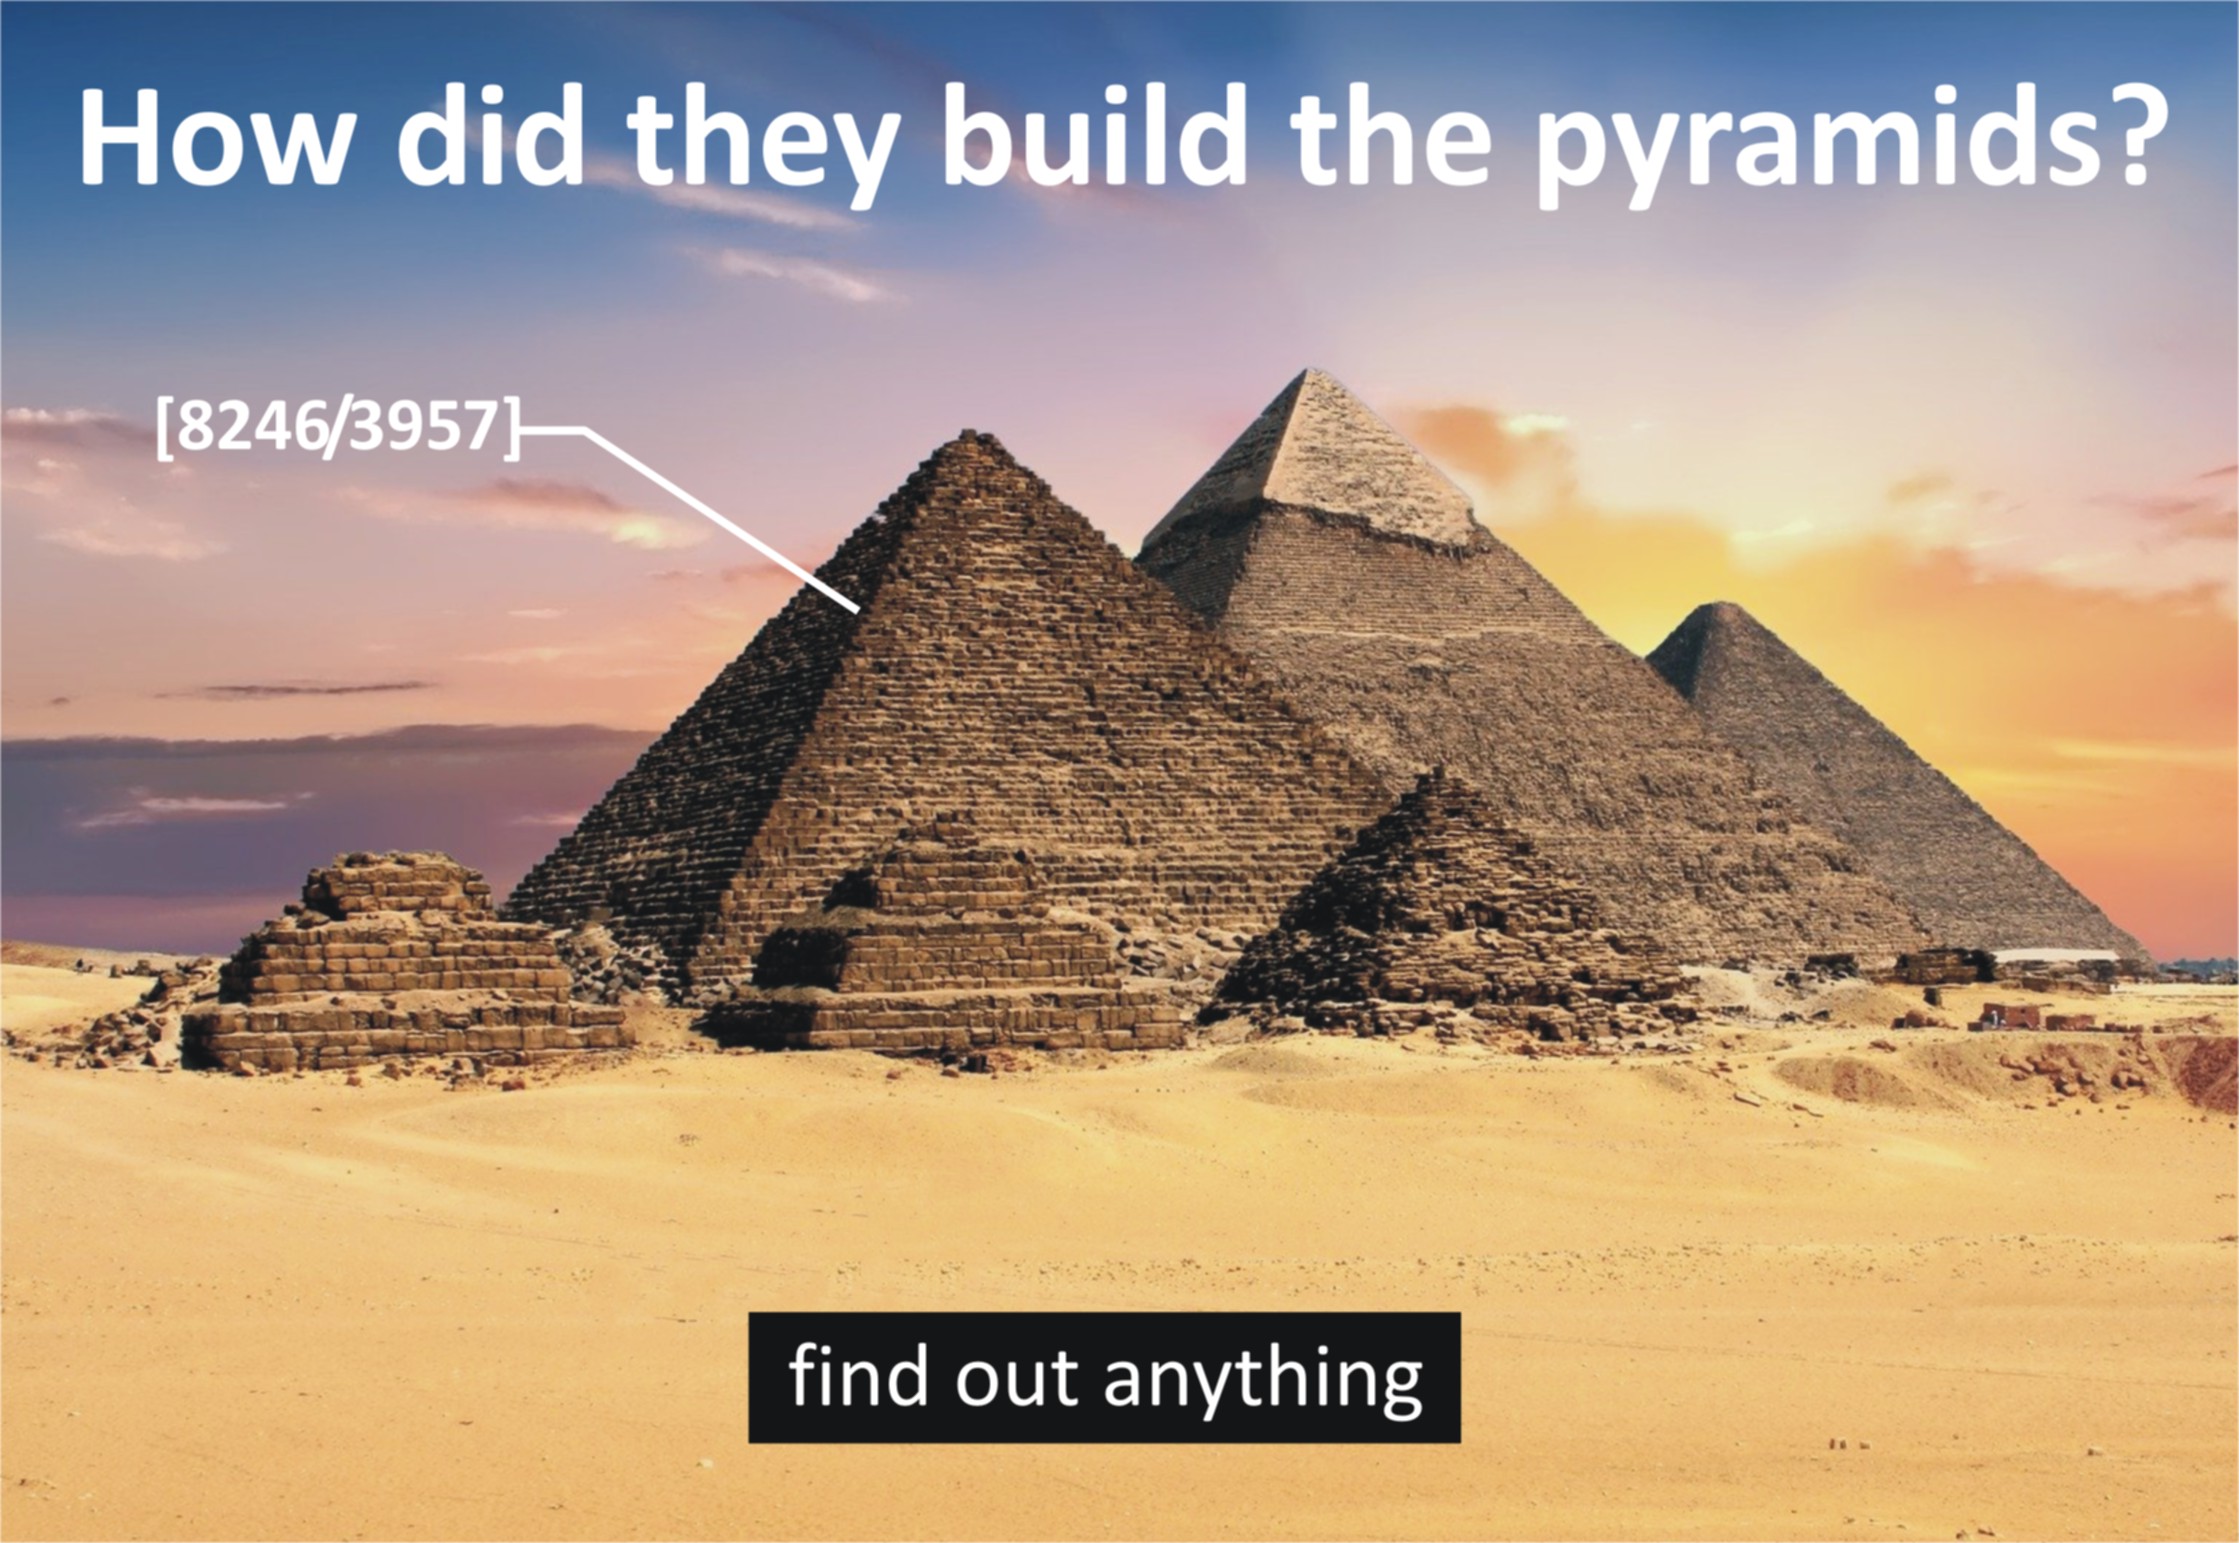 How did they build the pyramids?